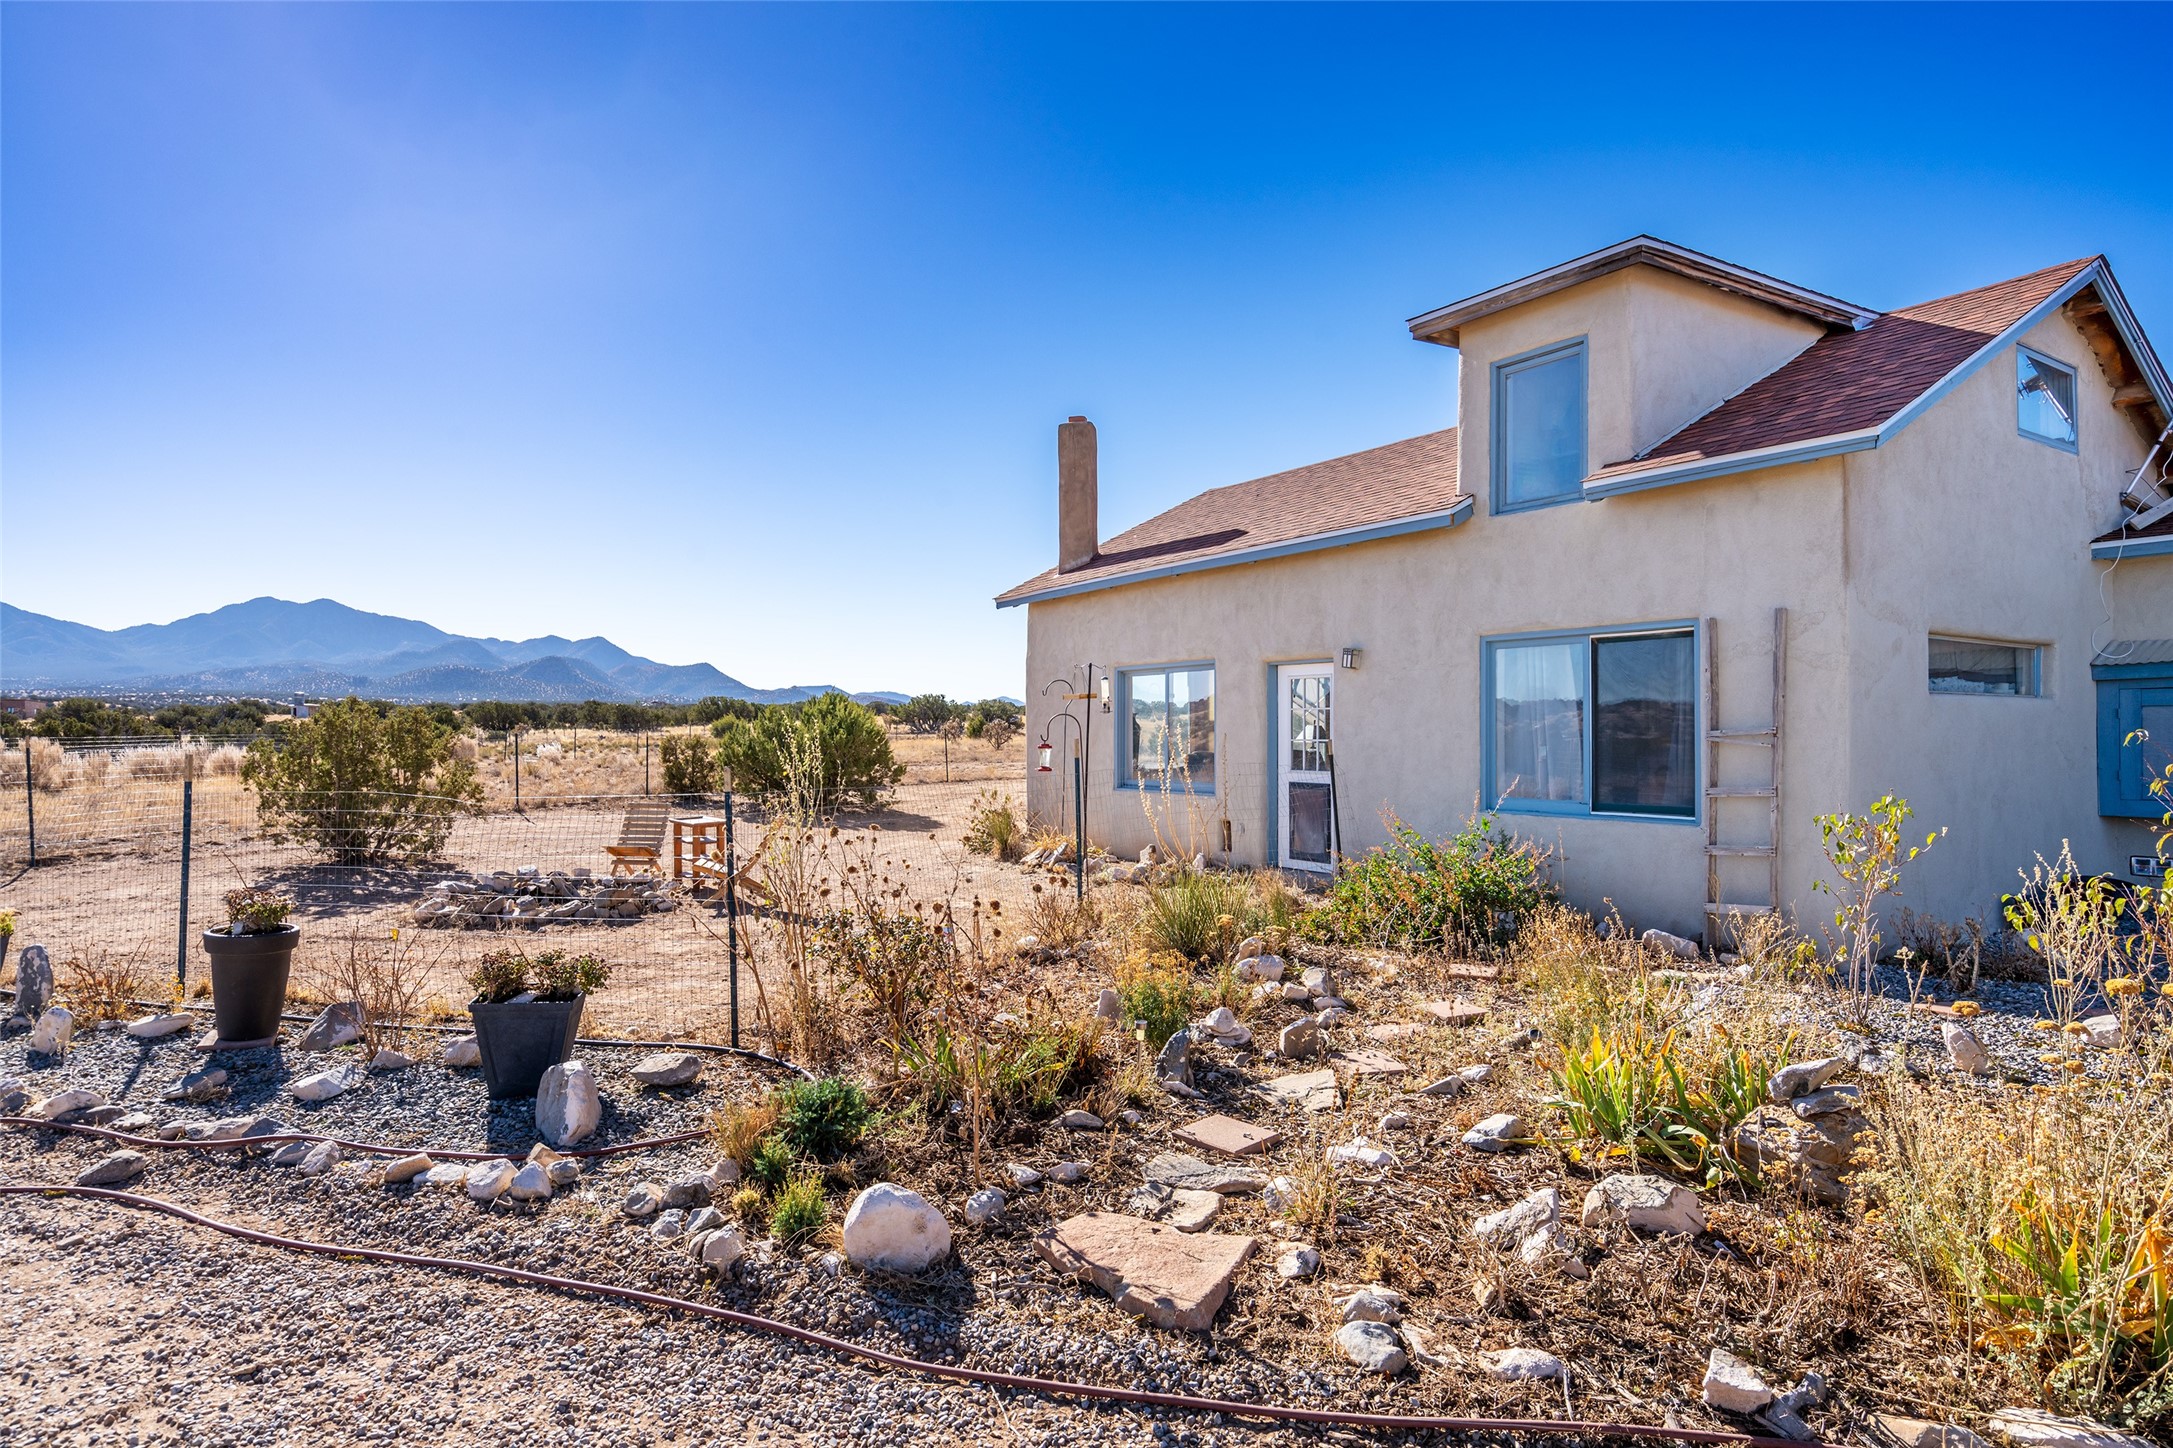 47 and 60 Cliff View Road, Cerrillos, New Mexico 87010, 3 Bedrooms Bedrooms, ,2 BathroomsBathrooms,Residential,For Sale,47 and 60 Cliff View Road,202341309